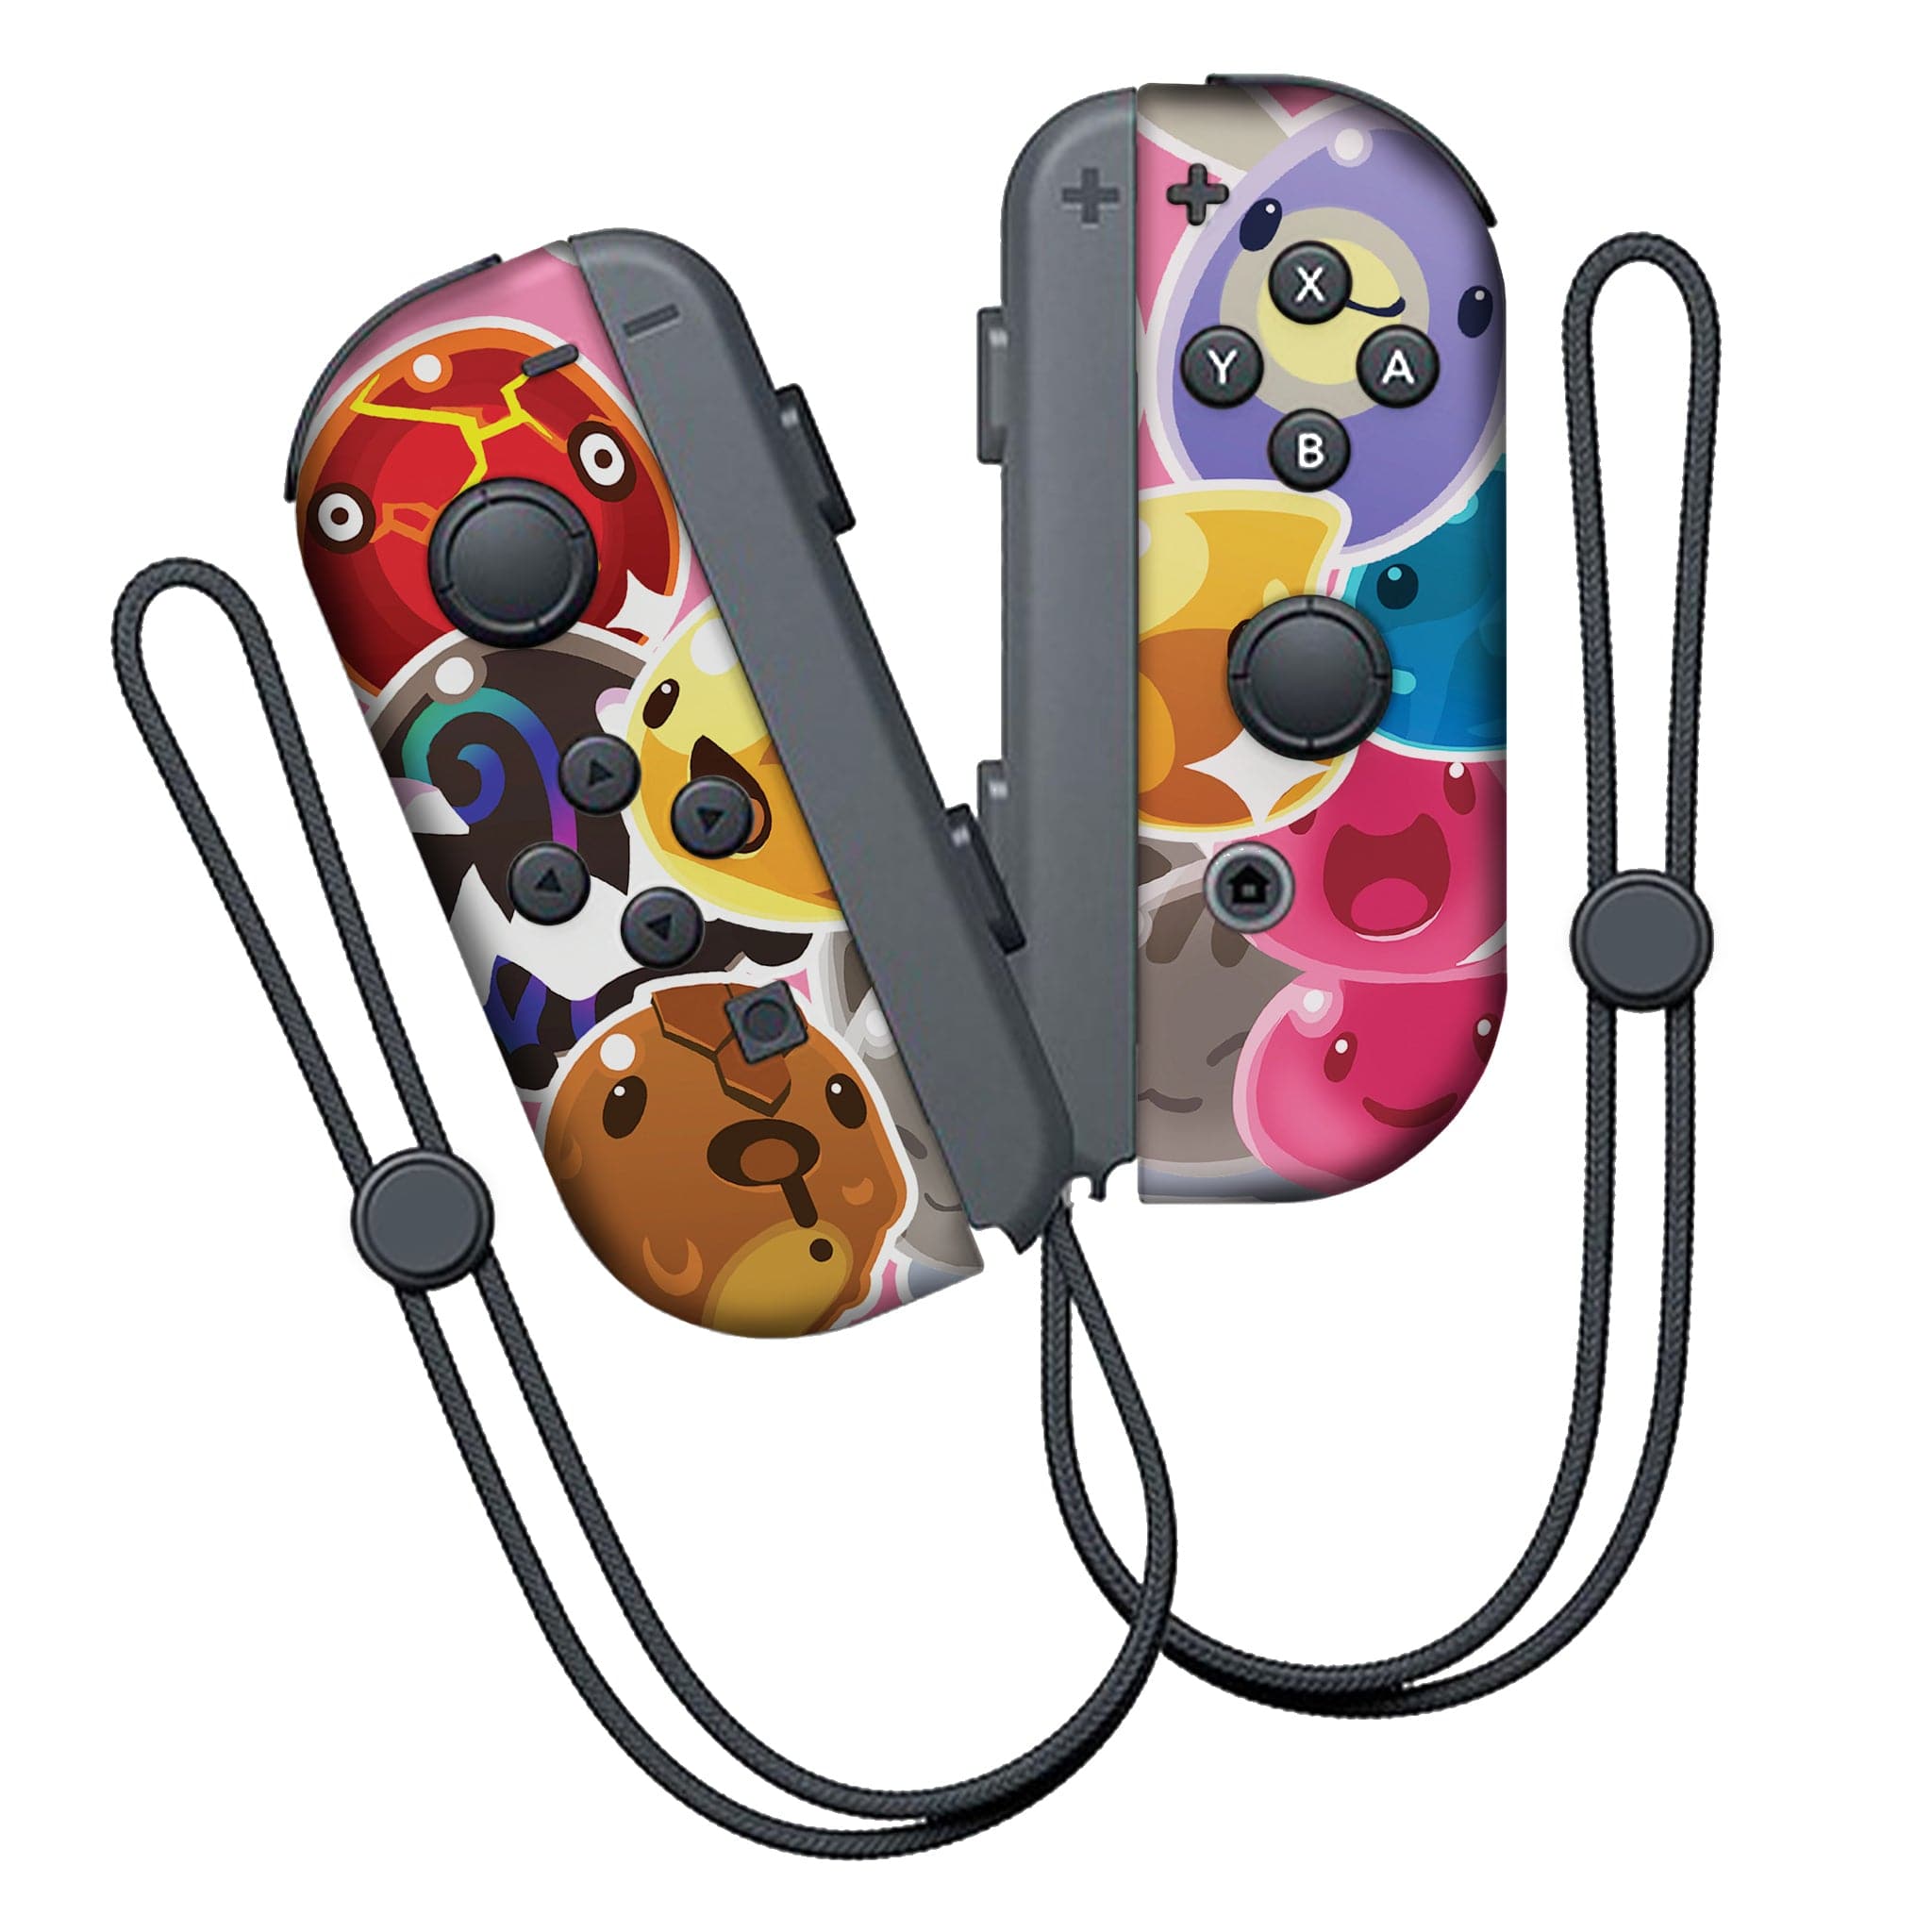 Slime Rancher 2 Inspired Nintendo Switch Joy-Con Left and Right Switch Controllers by Nintendo